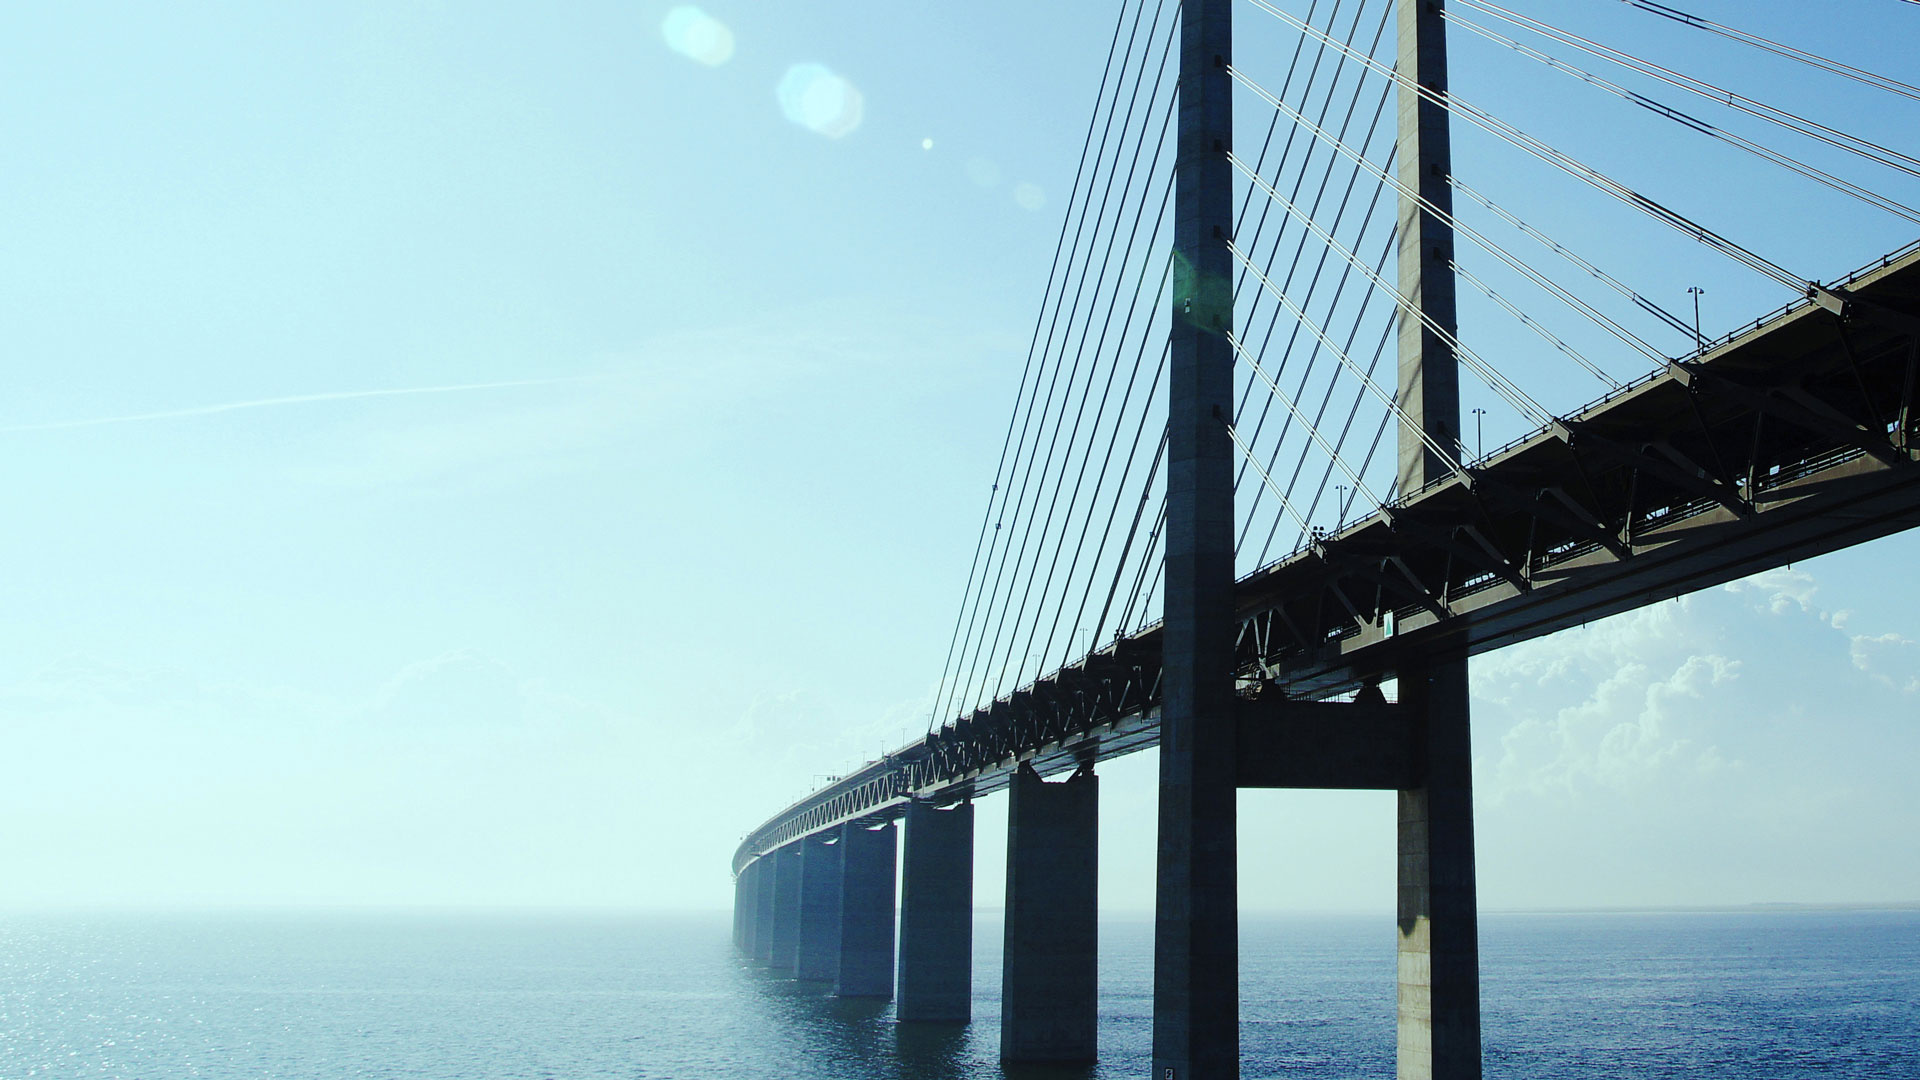 Bridge: The Oresund Span, A combined railway and motorway span between Denmark and Sweden. 1920x1080 Full HD Background.